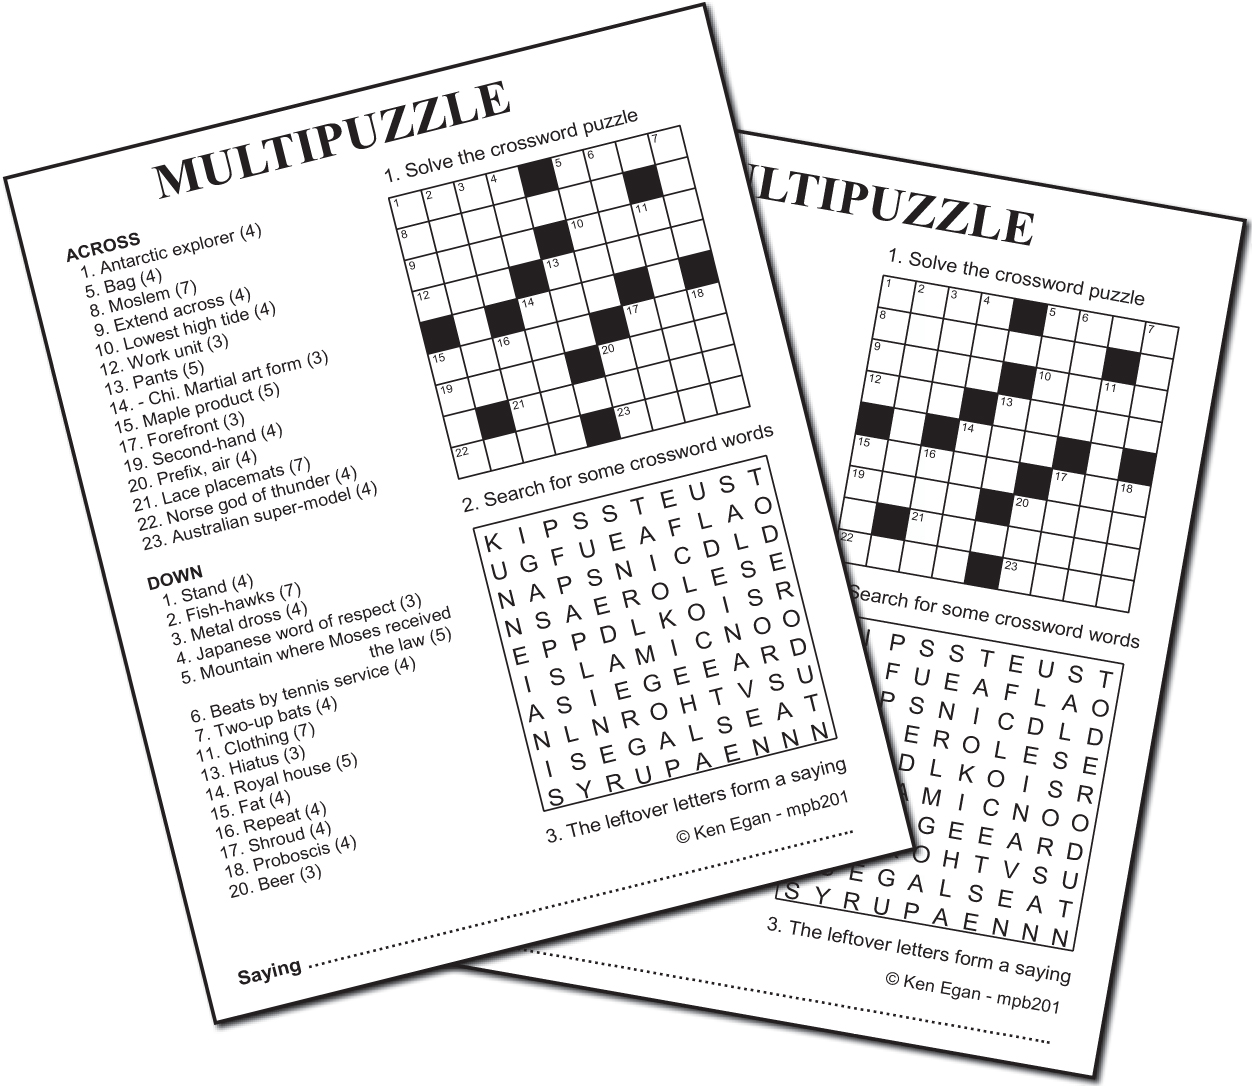 Thumbnail for 20 MULTIPUZZLE PUZZLE BOOKLET 01